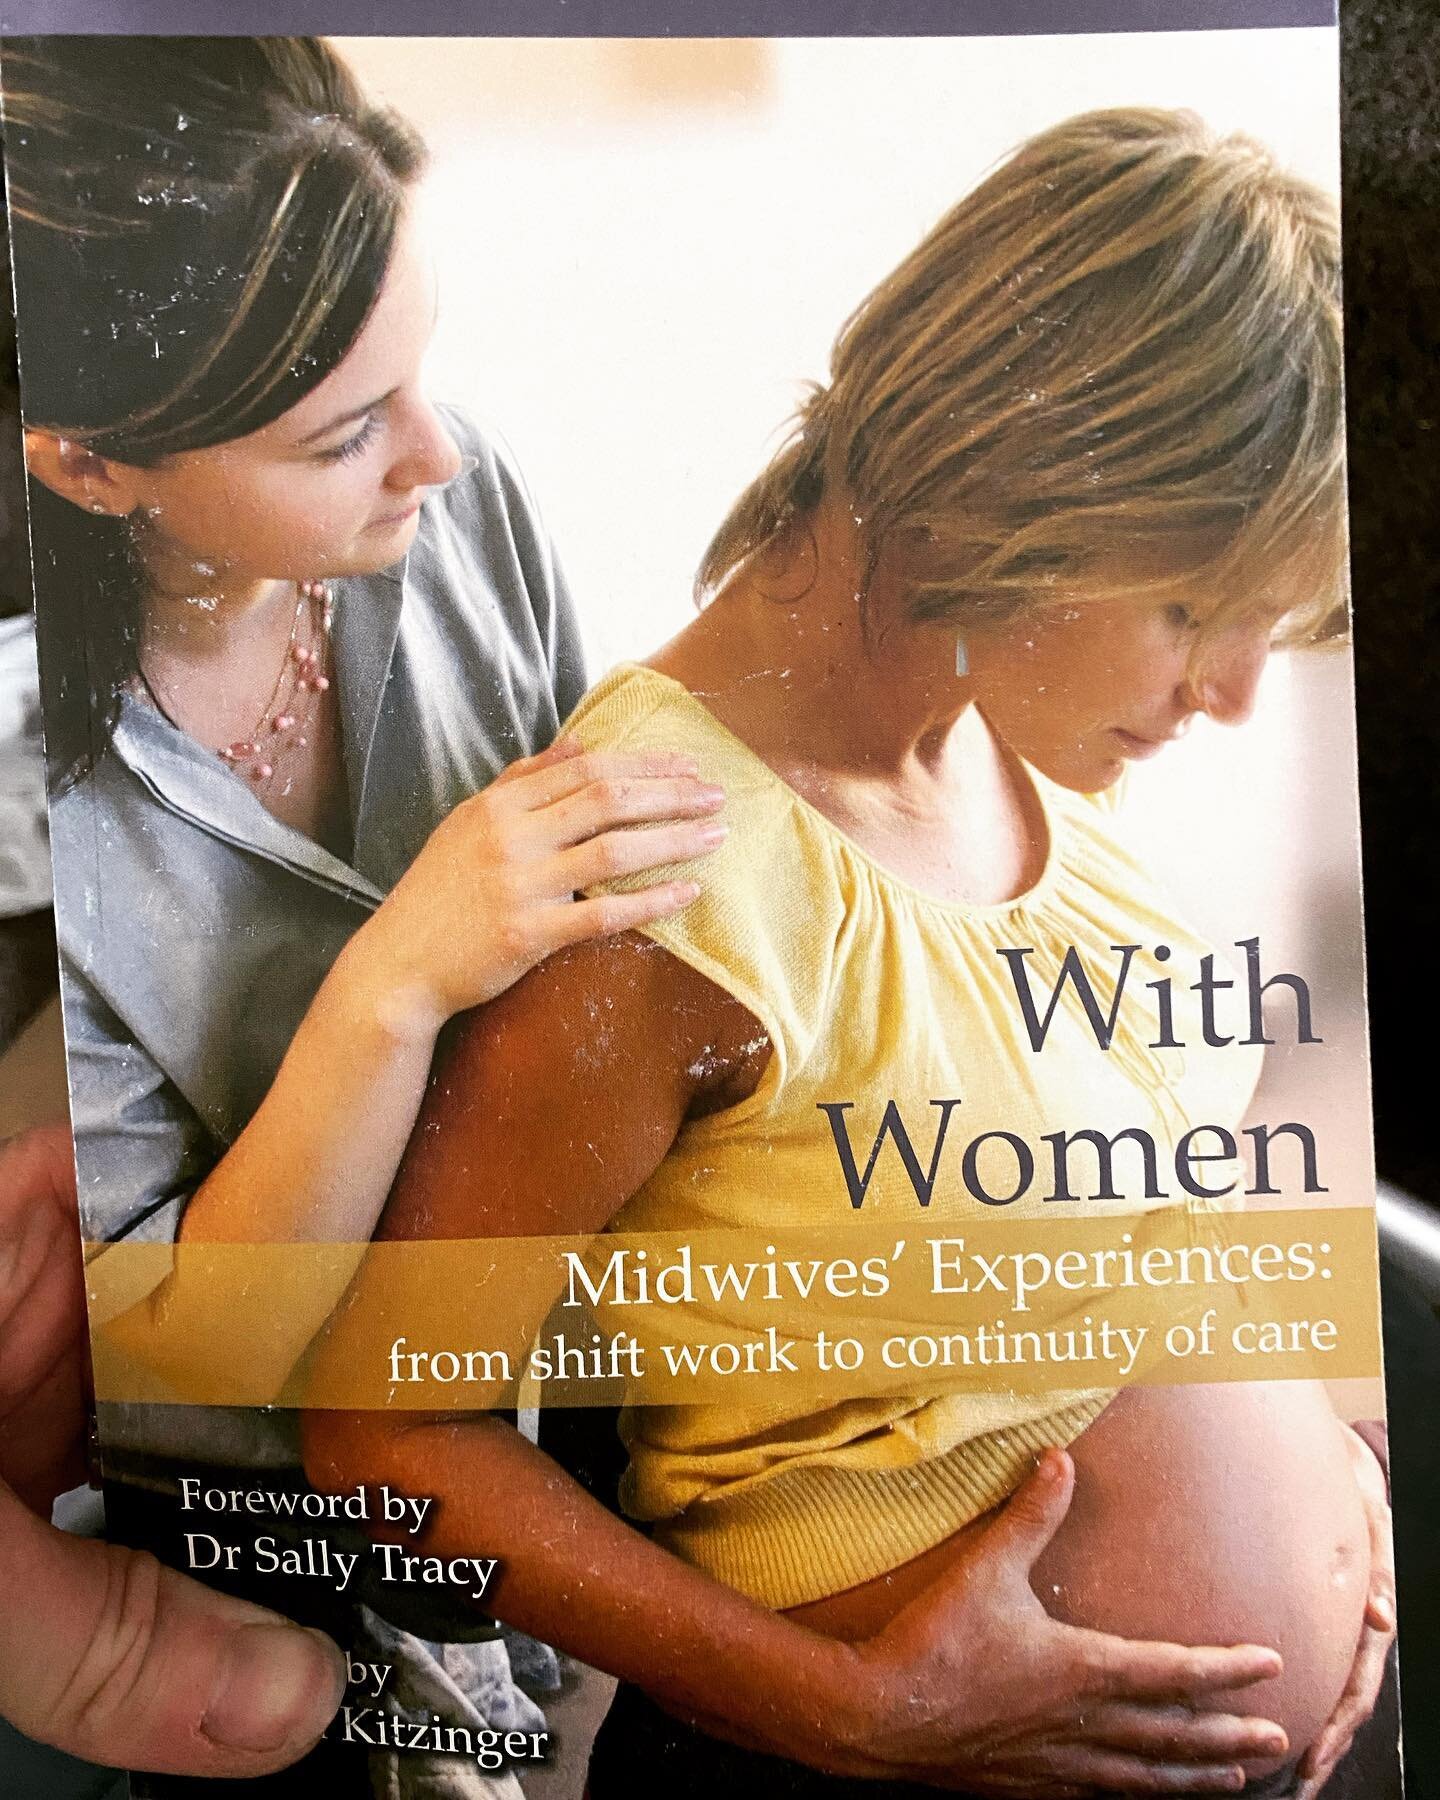 Happy International Day of the Midwife! 

Thought I would share a couple of did you knows&hellip; first one is a little something about me you probably did not know is that I am on the cover of a book, with the beautiful Bobbi when she was expecting 